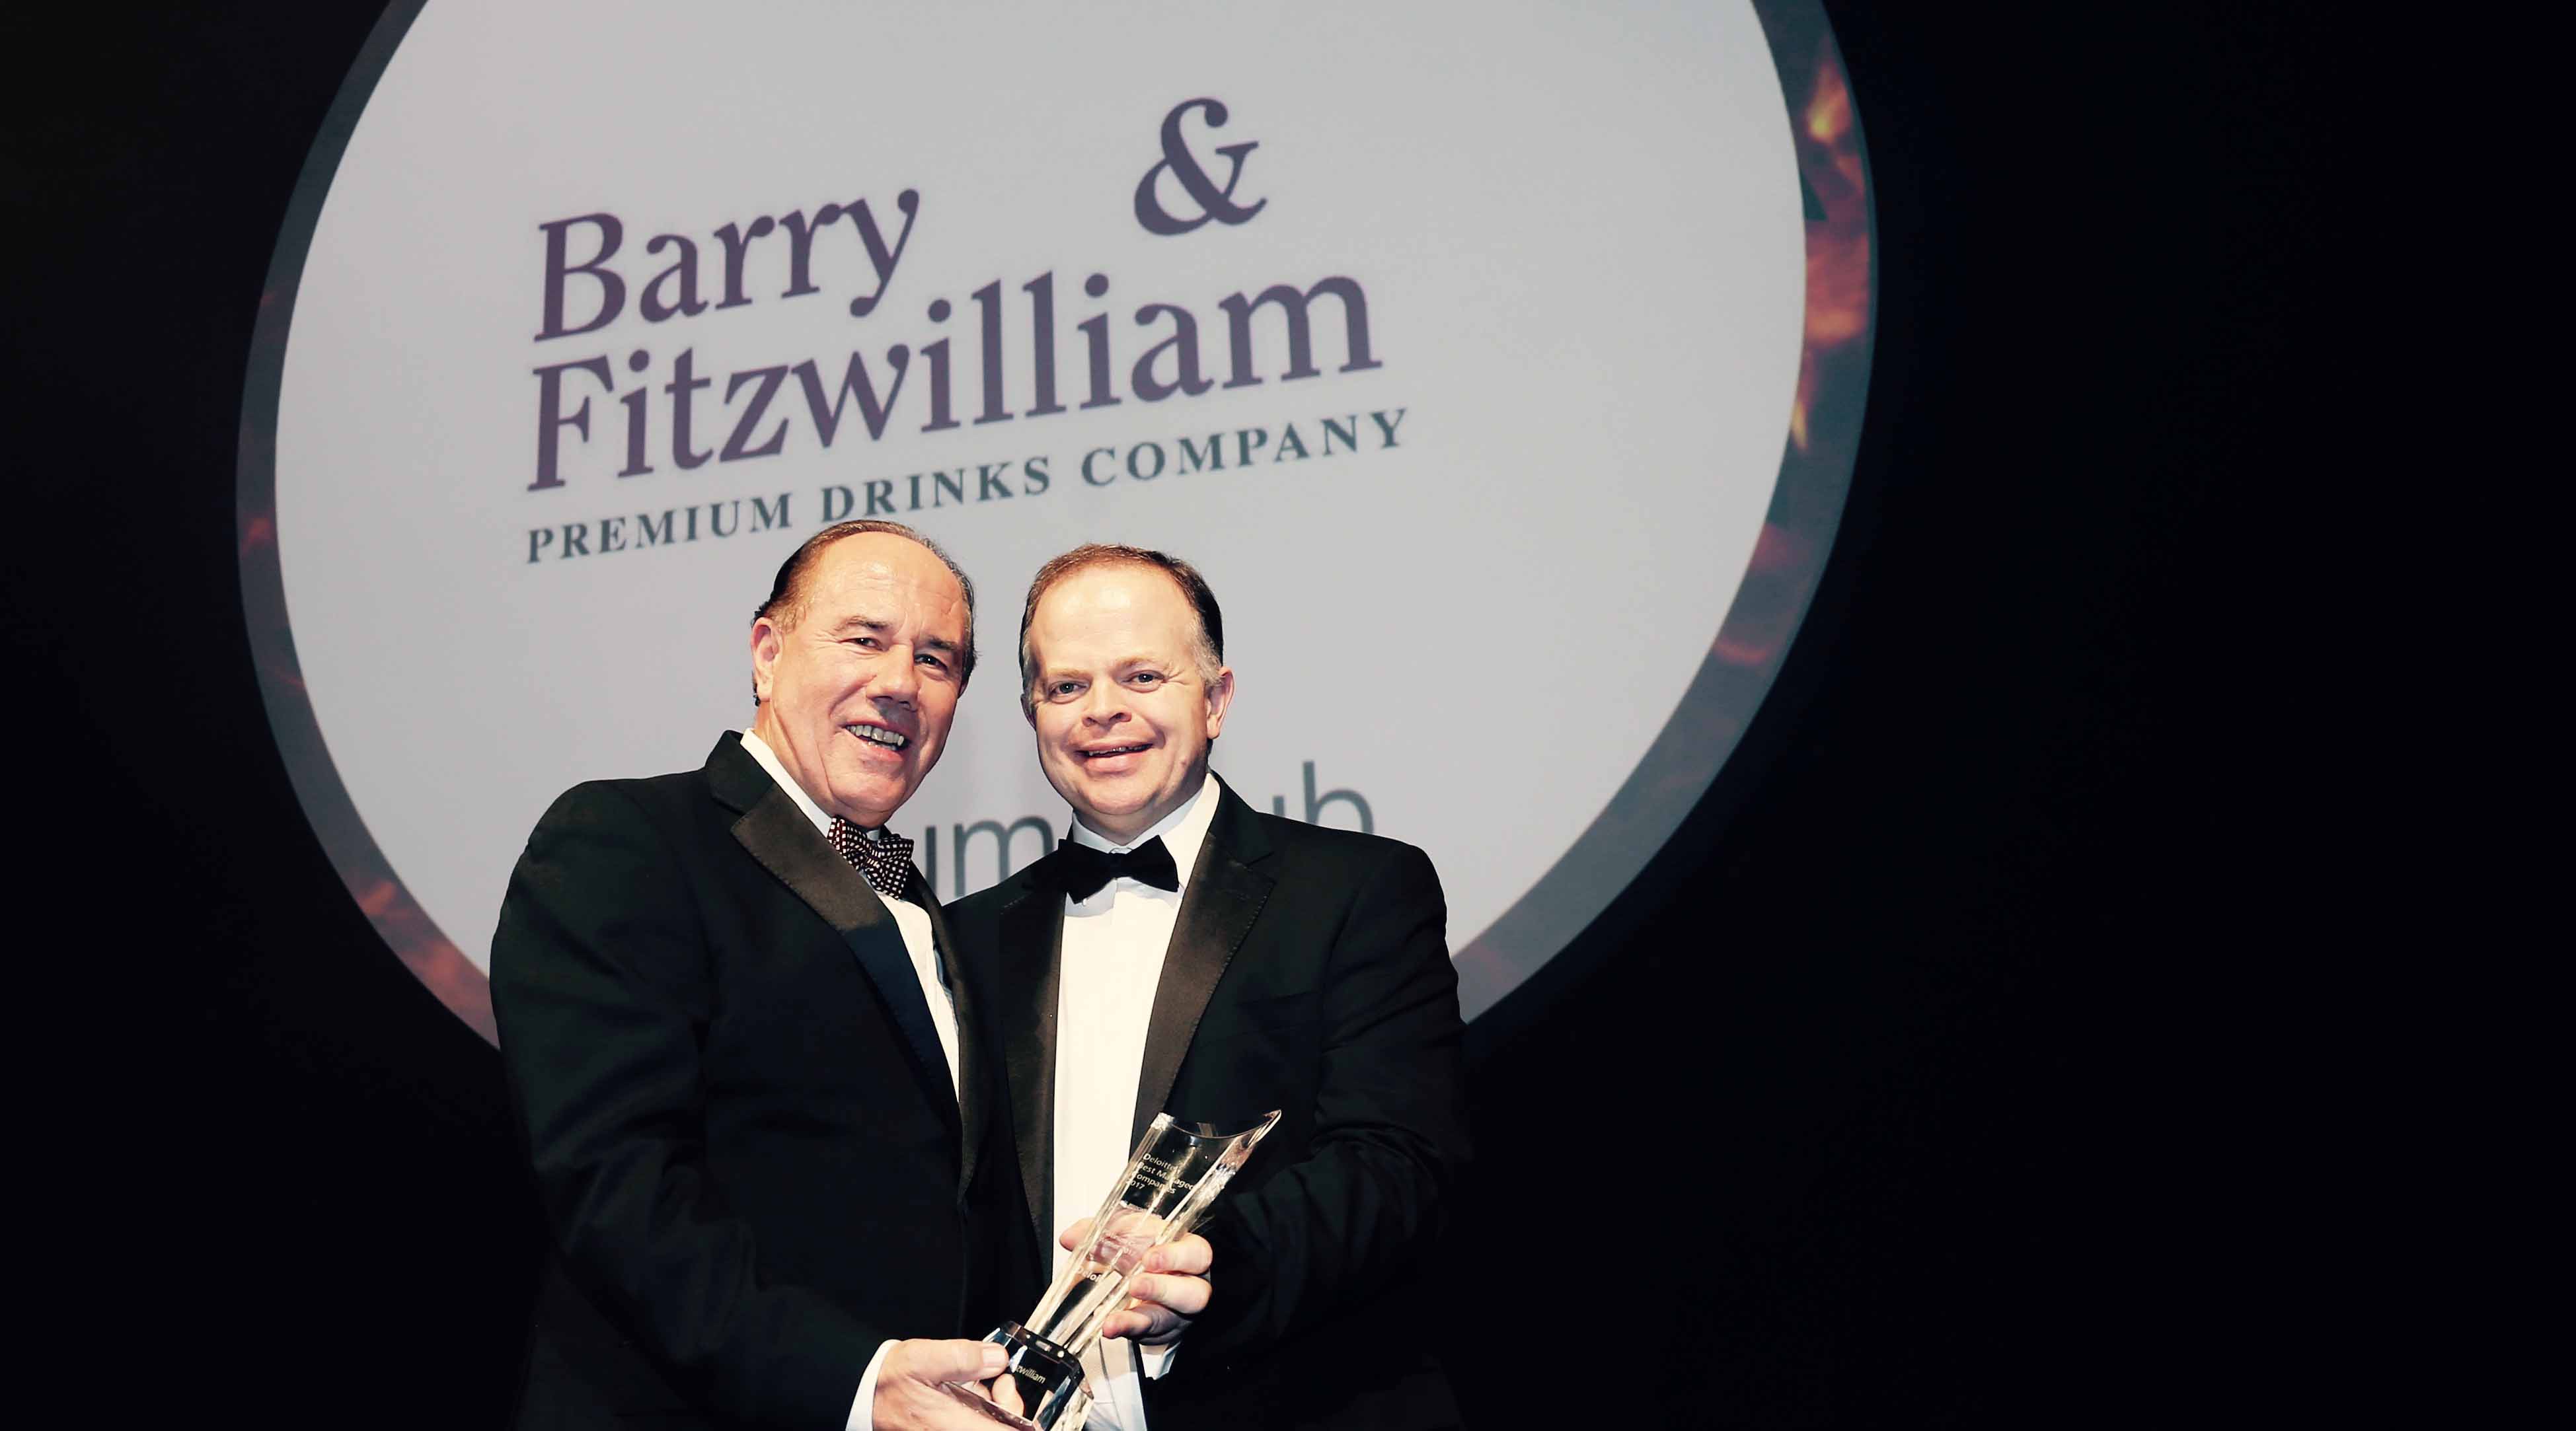 From left: Barry & Fitzwilliam’s Michael Barry collects at Platinum Award for Best Managed Company from Deloitte Partner Richard Howard.